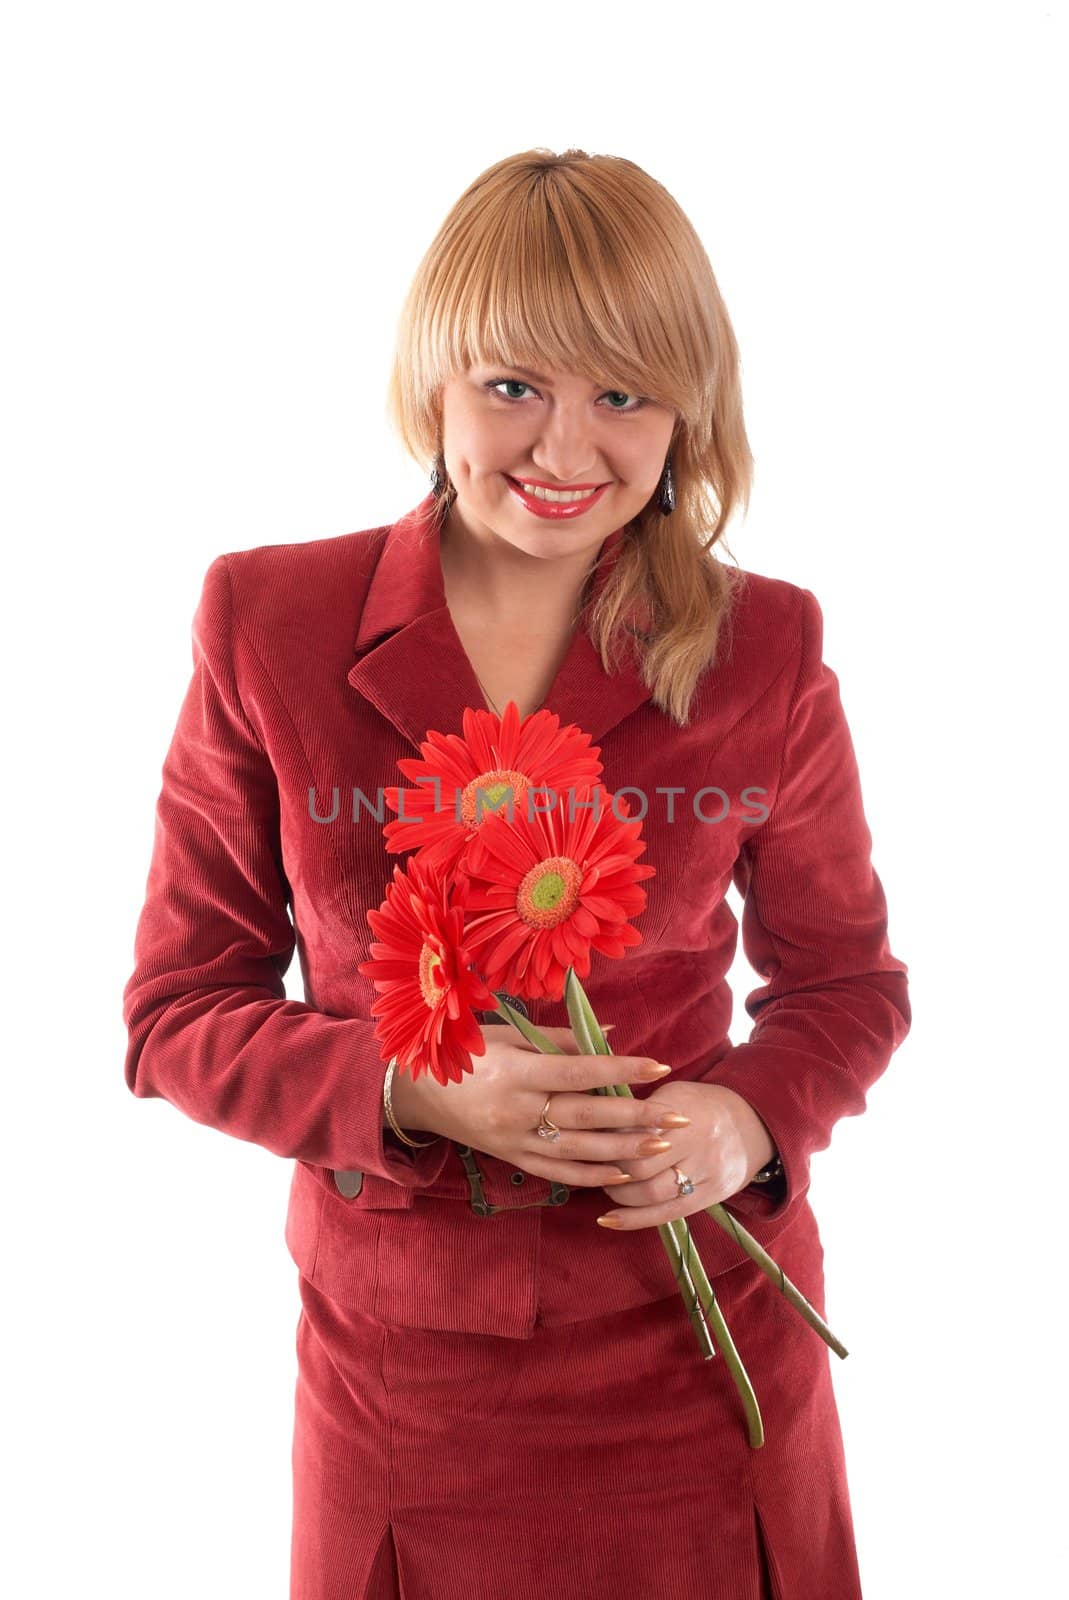 An image of a girl with red flowewrs